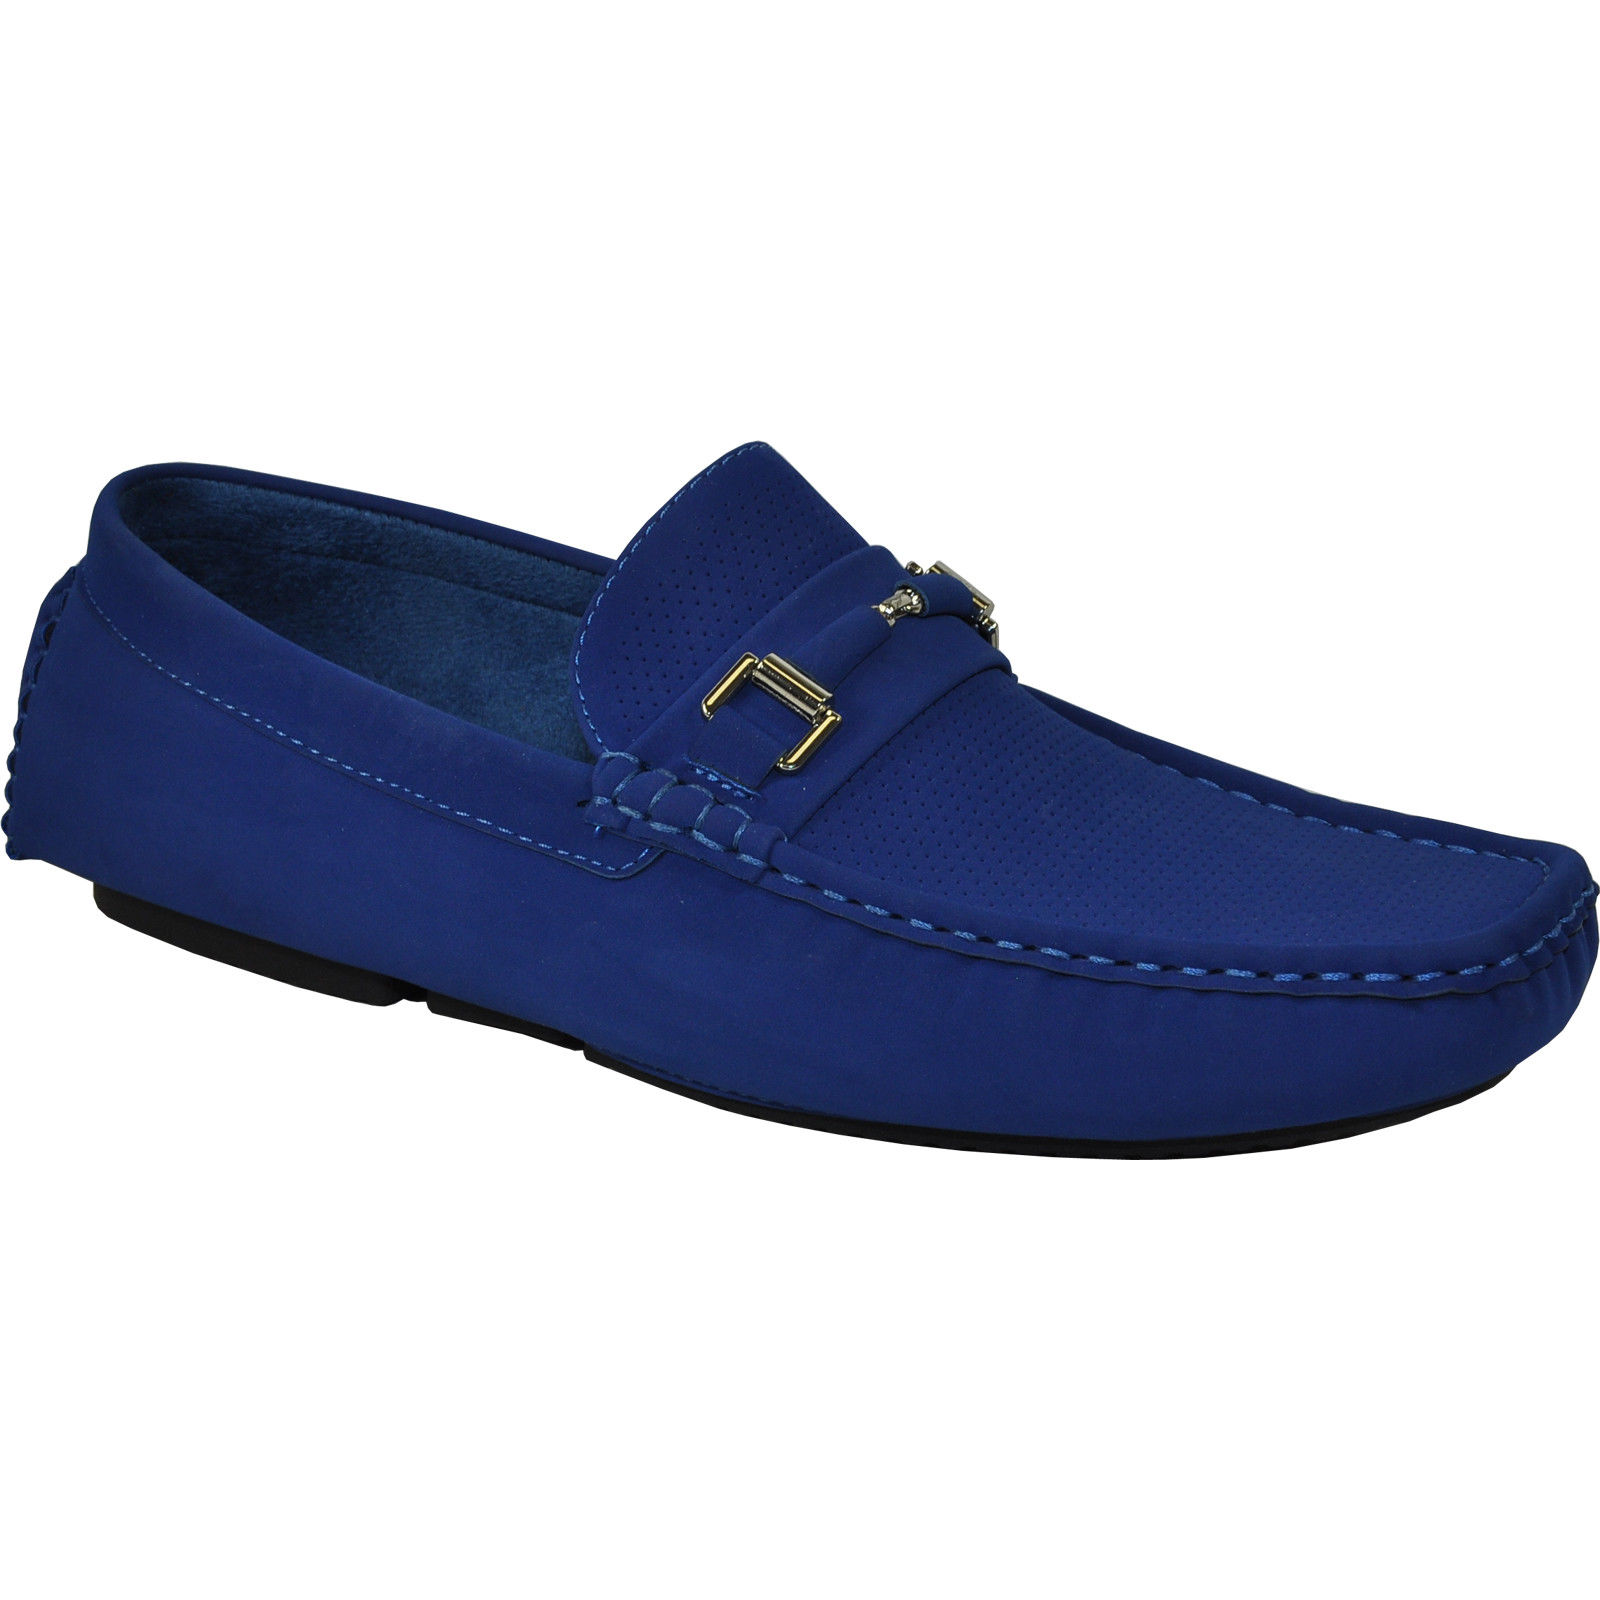 Bravo! Men Casual Shoe Todd-1 Driving Moccasin Blue 13M US - image 1 of 7